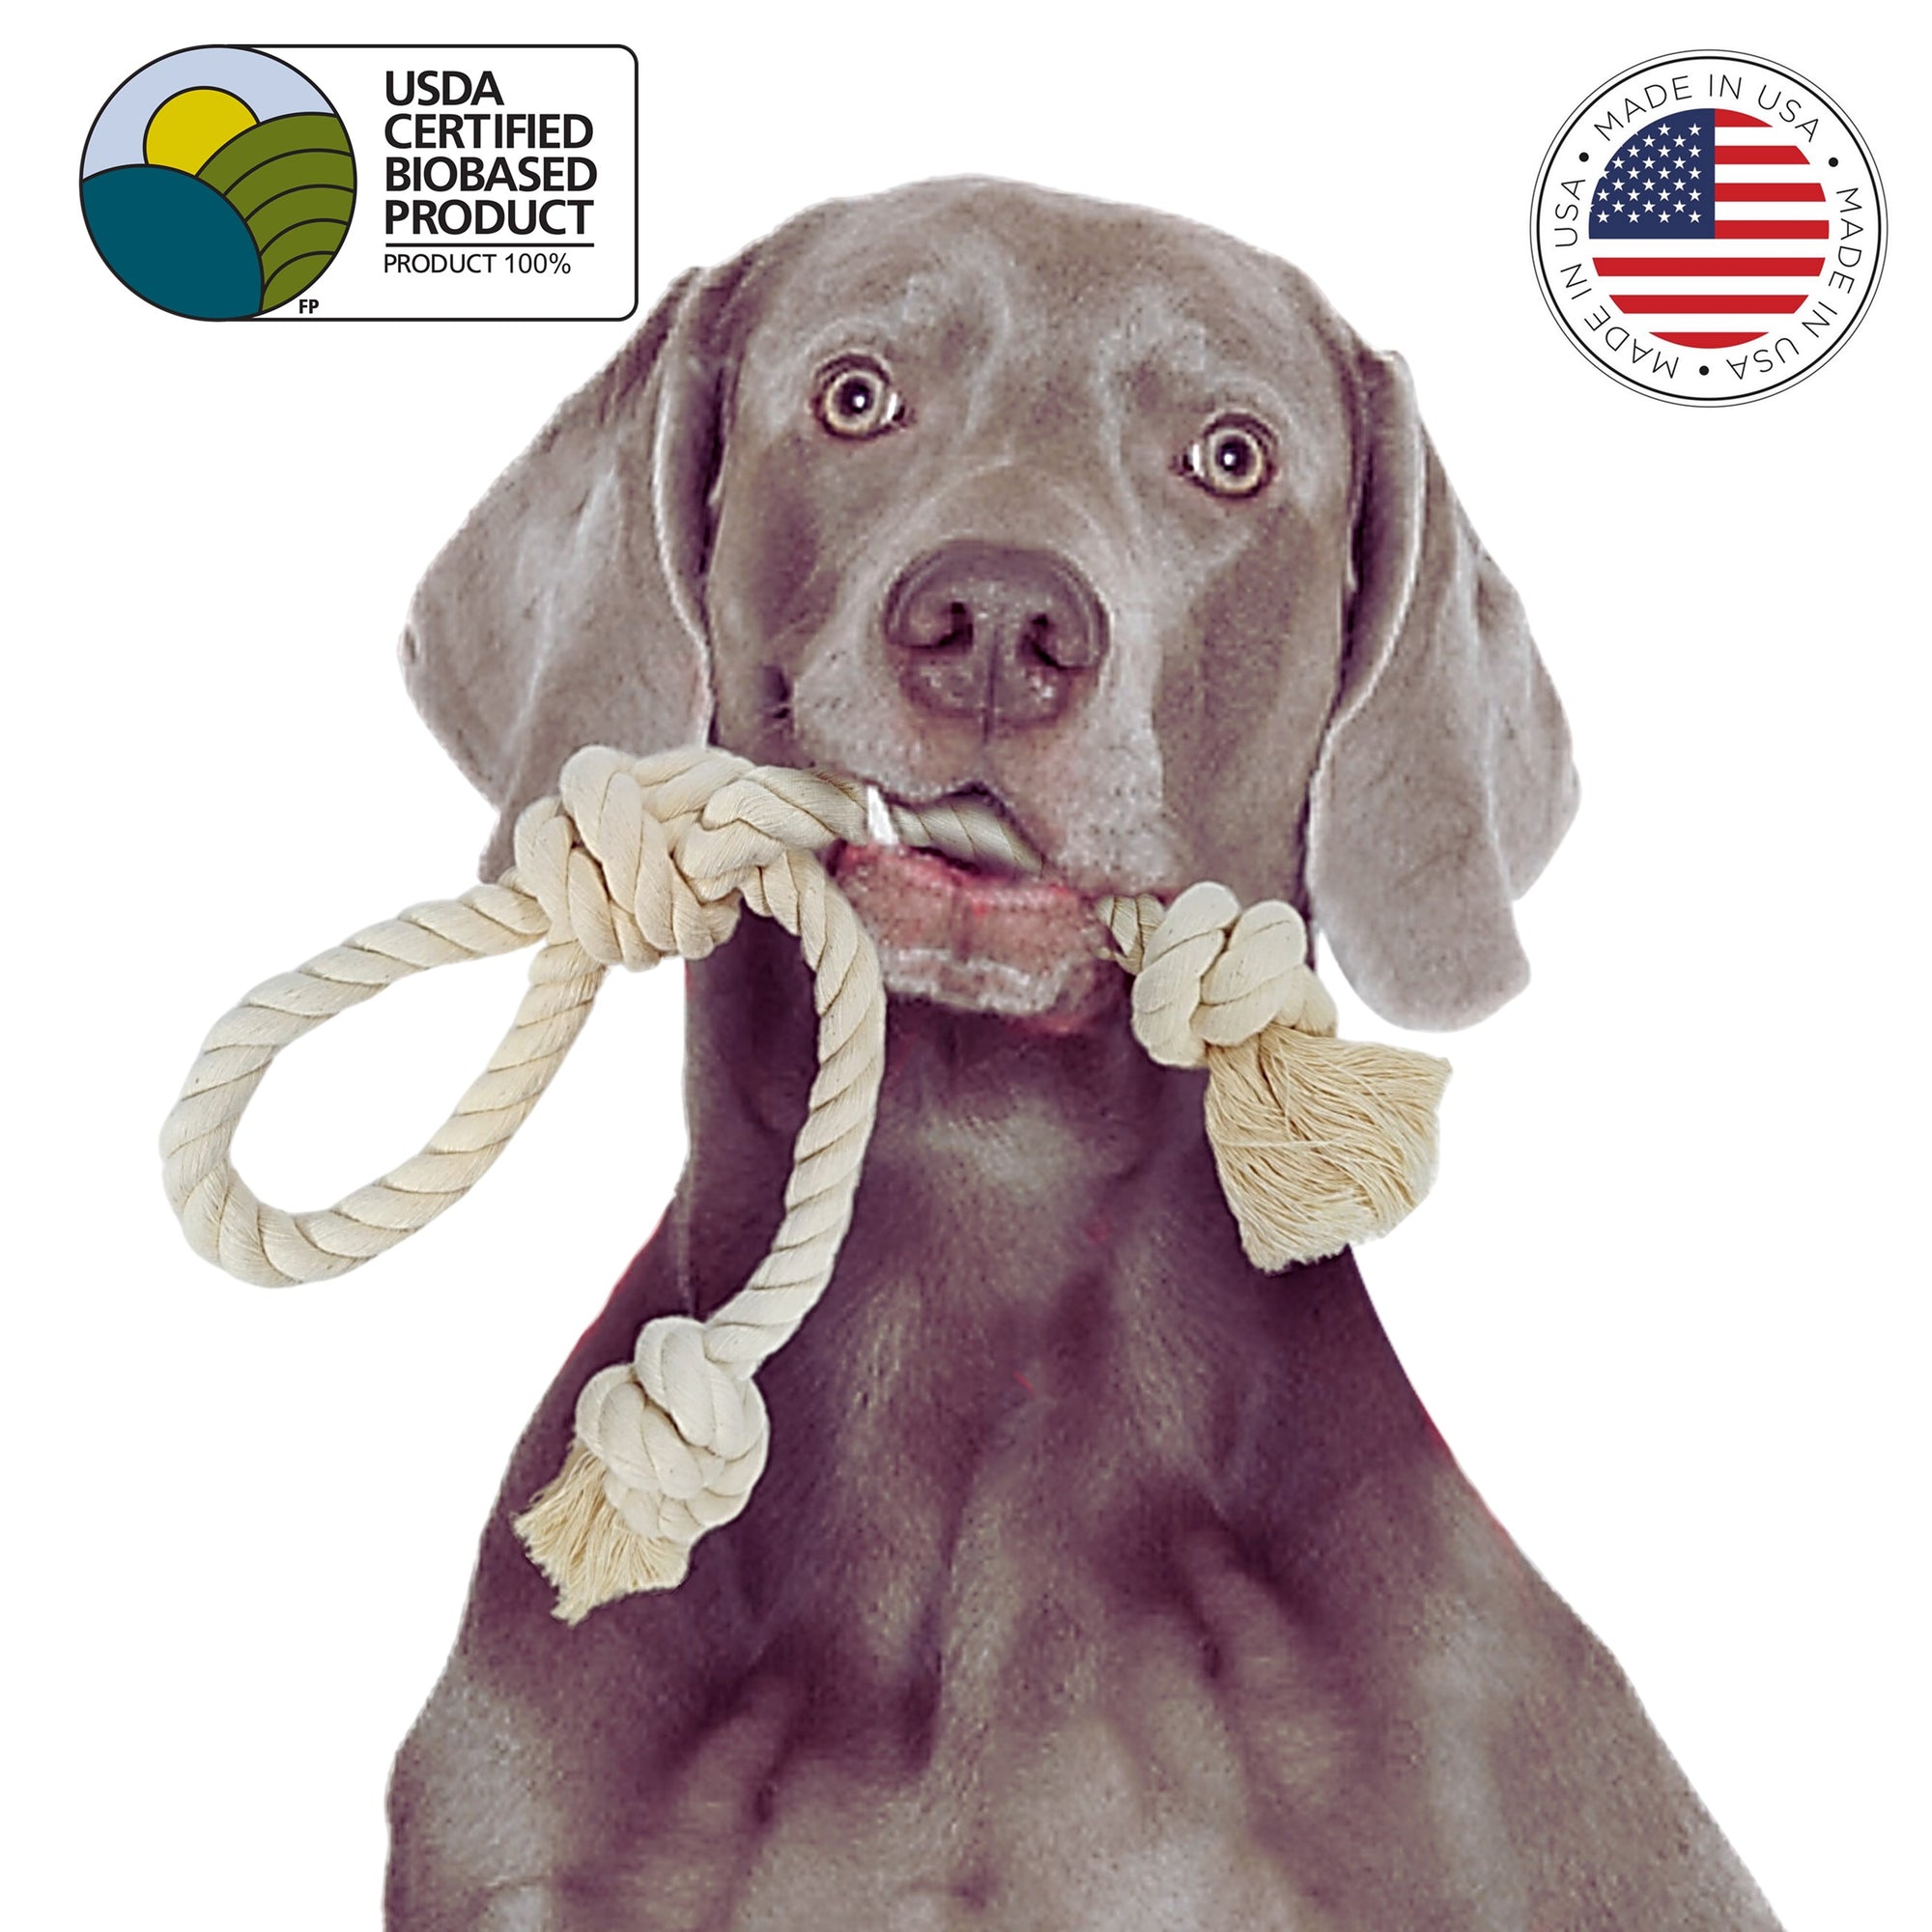 Dog with wishbone dog toy in mouth by earthcare